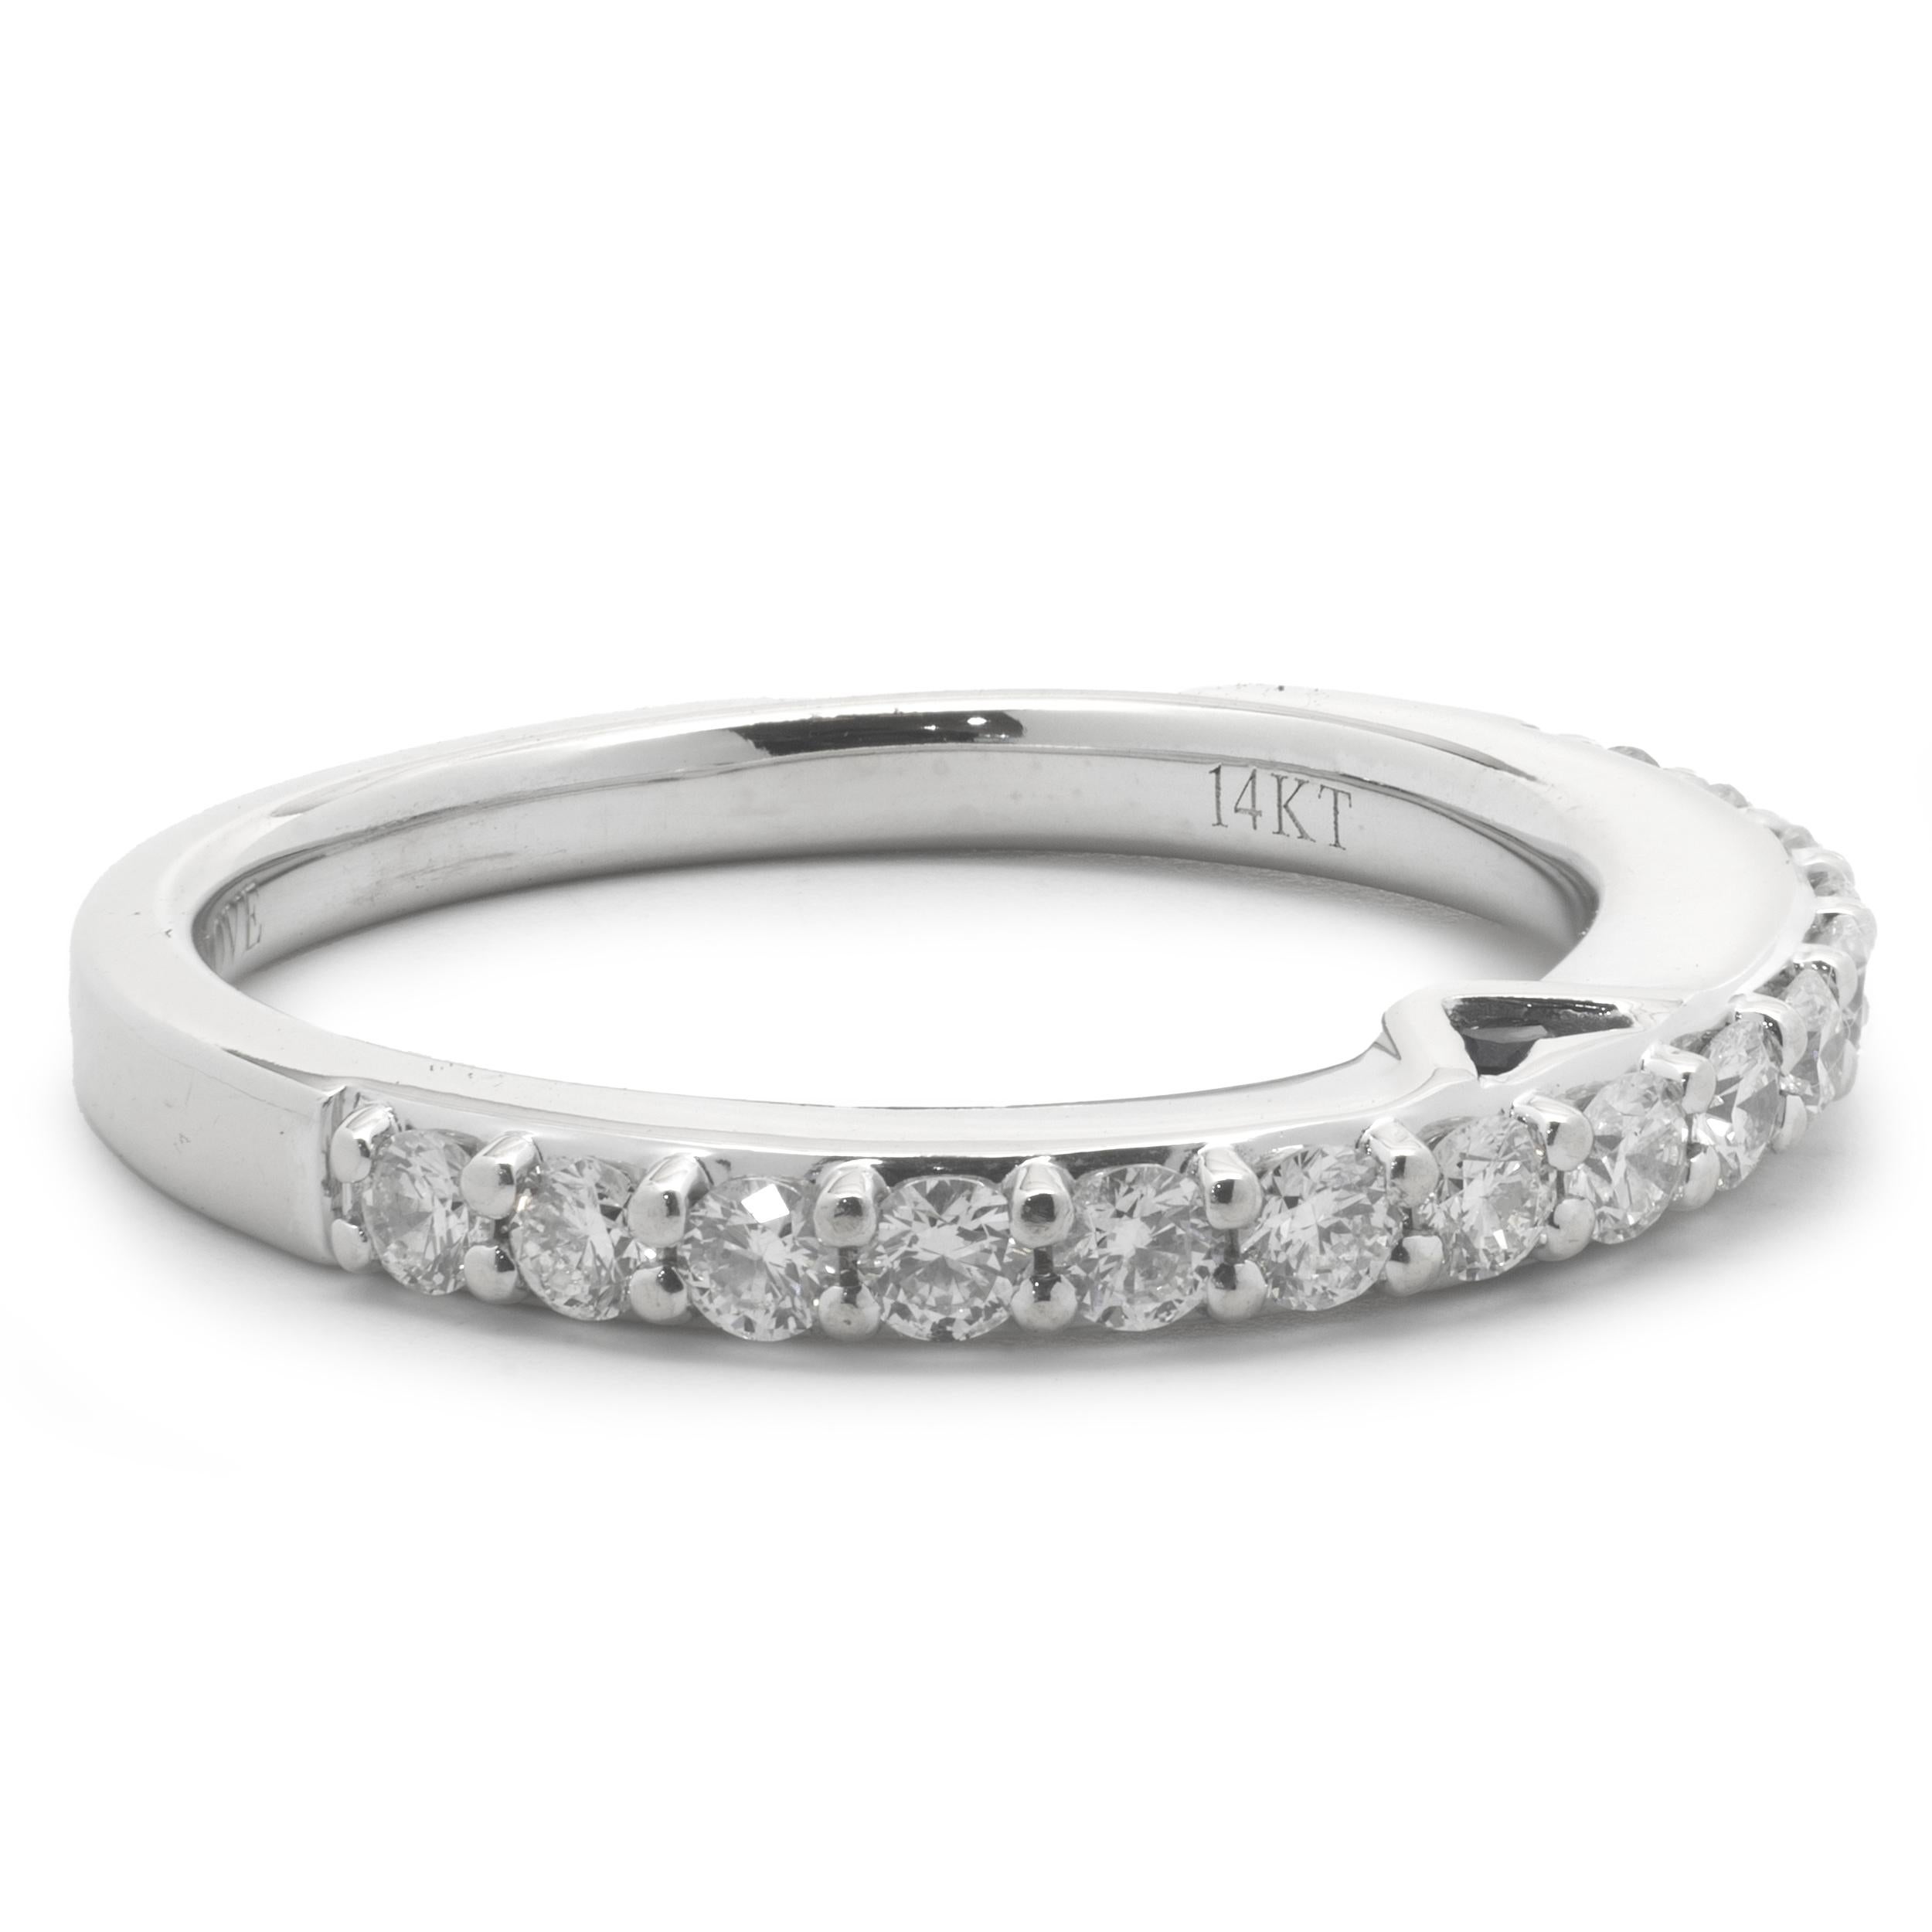 Designer: Vera Wang
Material: 14K white gold
Diamond: 15 round brilliant cut = .70cttw
Color: G
Clarity: VS1-2
Size: 7
Weight: 3.70 grams
